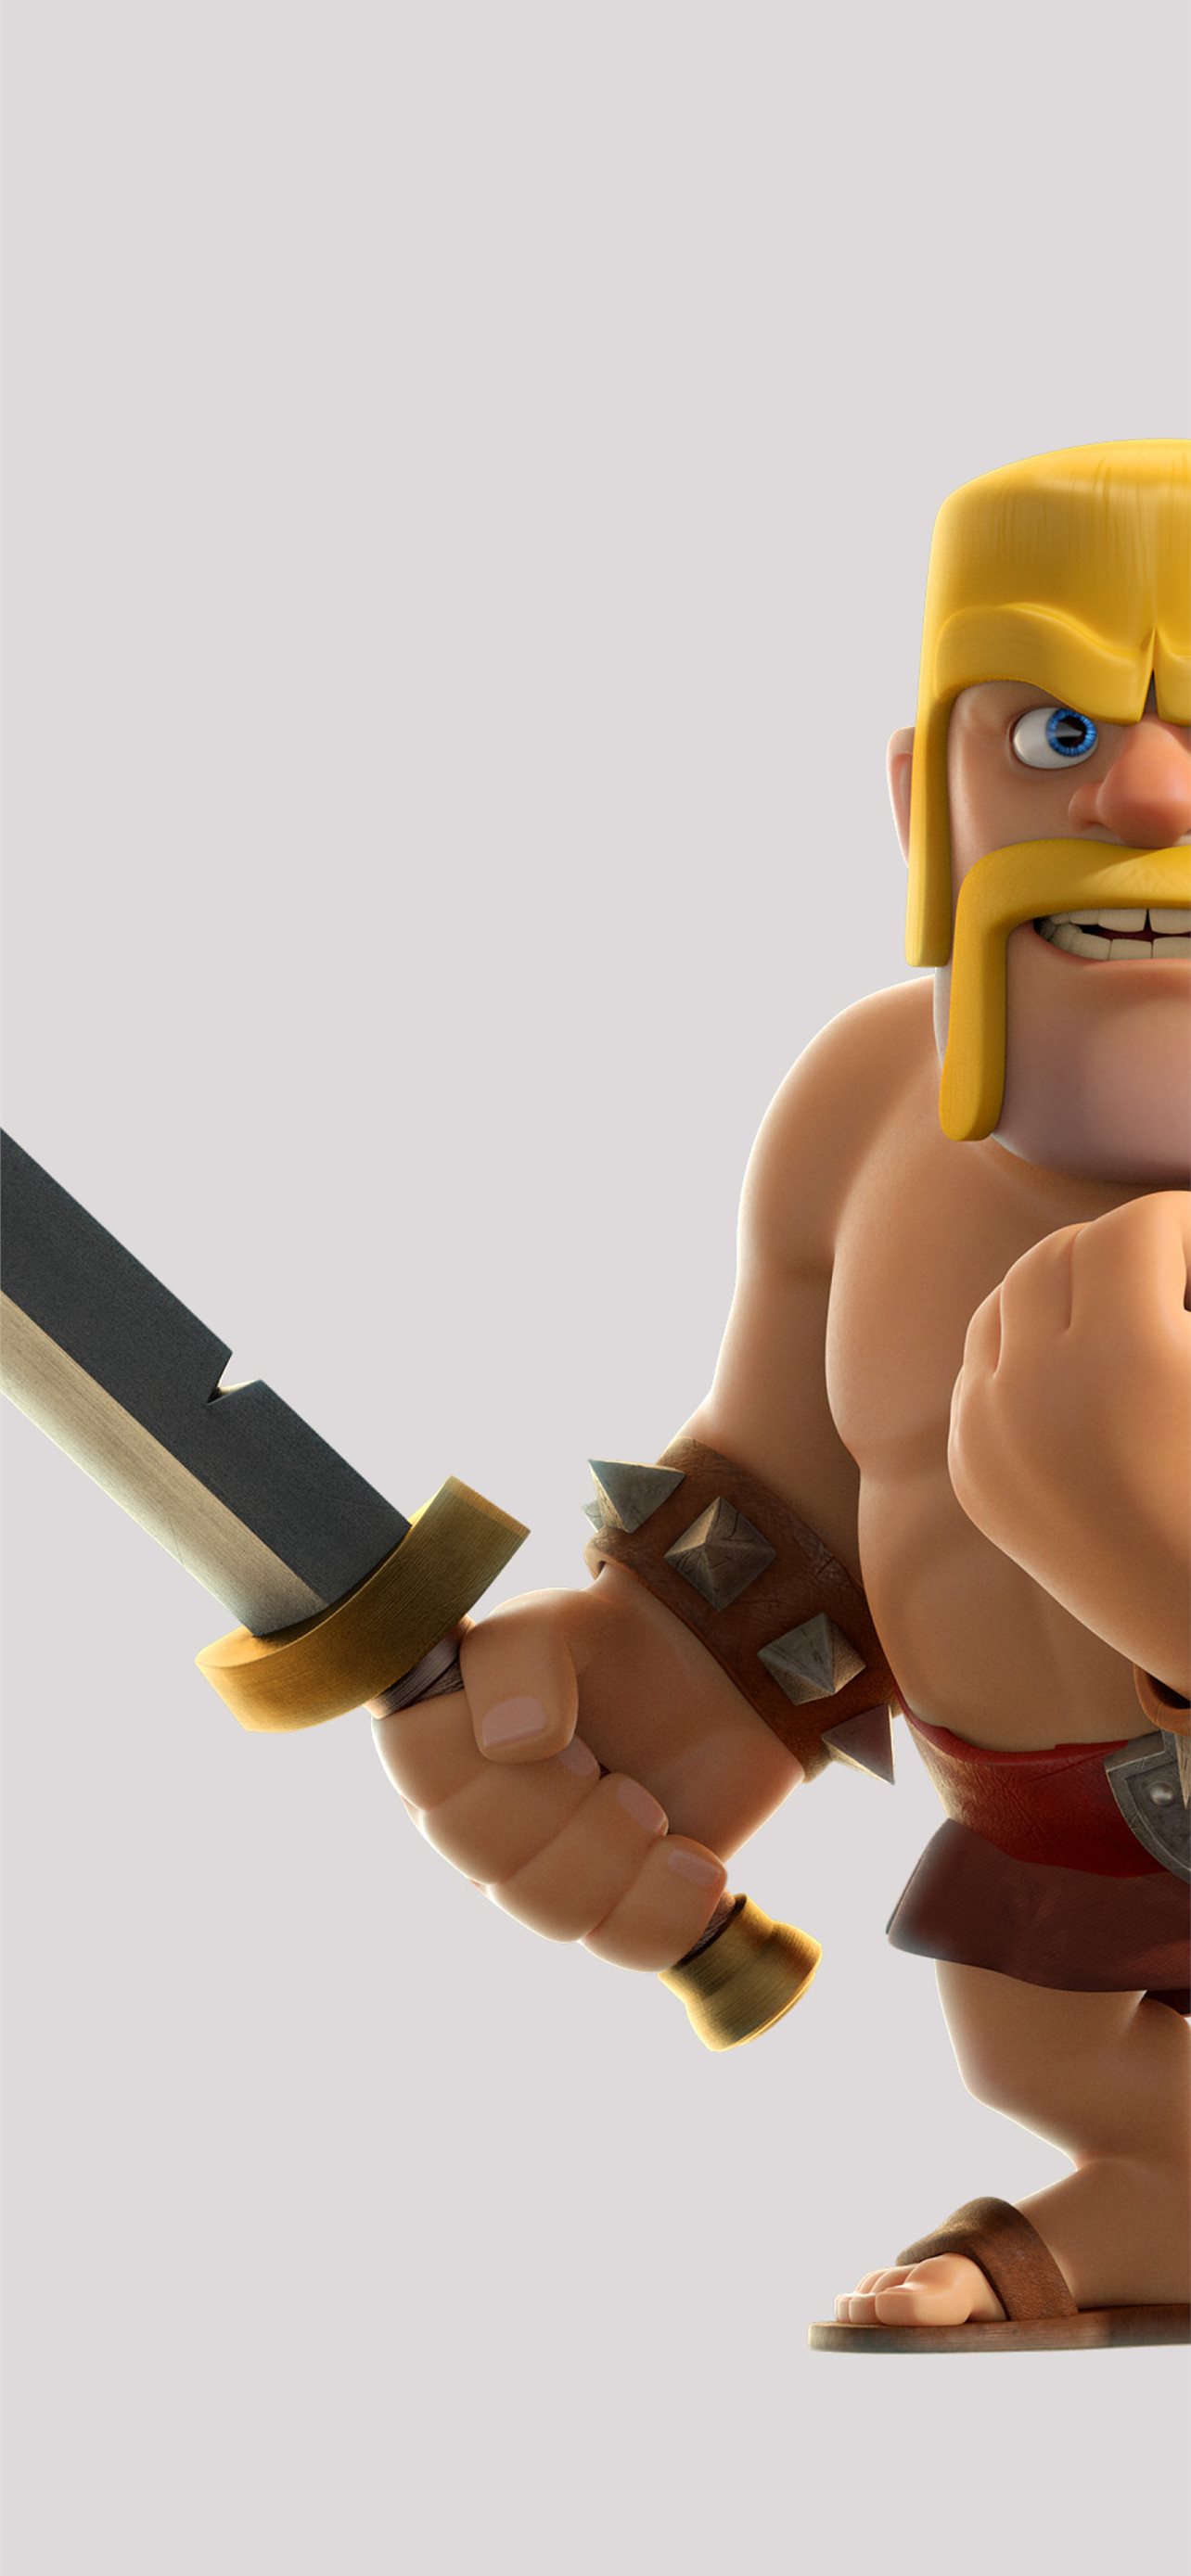 70 Clash of Clans HD Wallpapers and Backgrounds